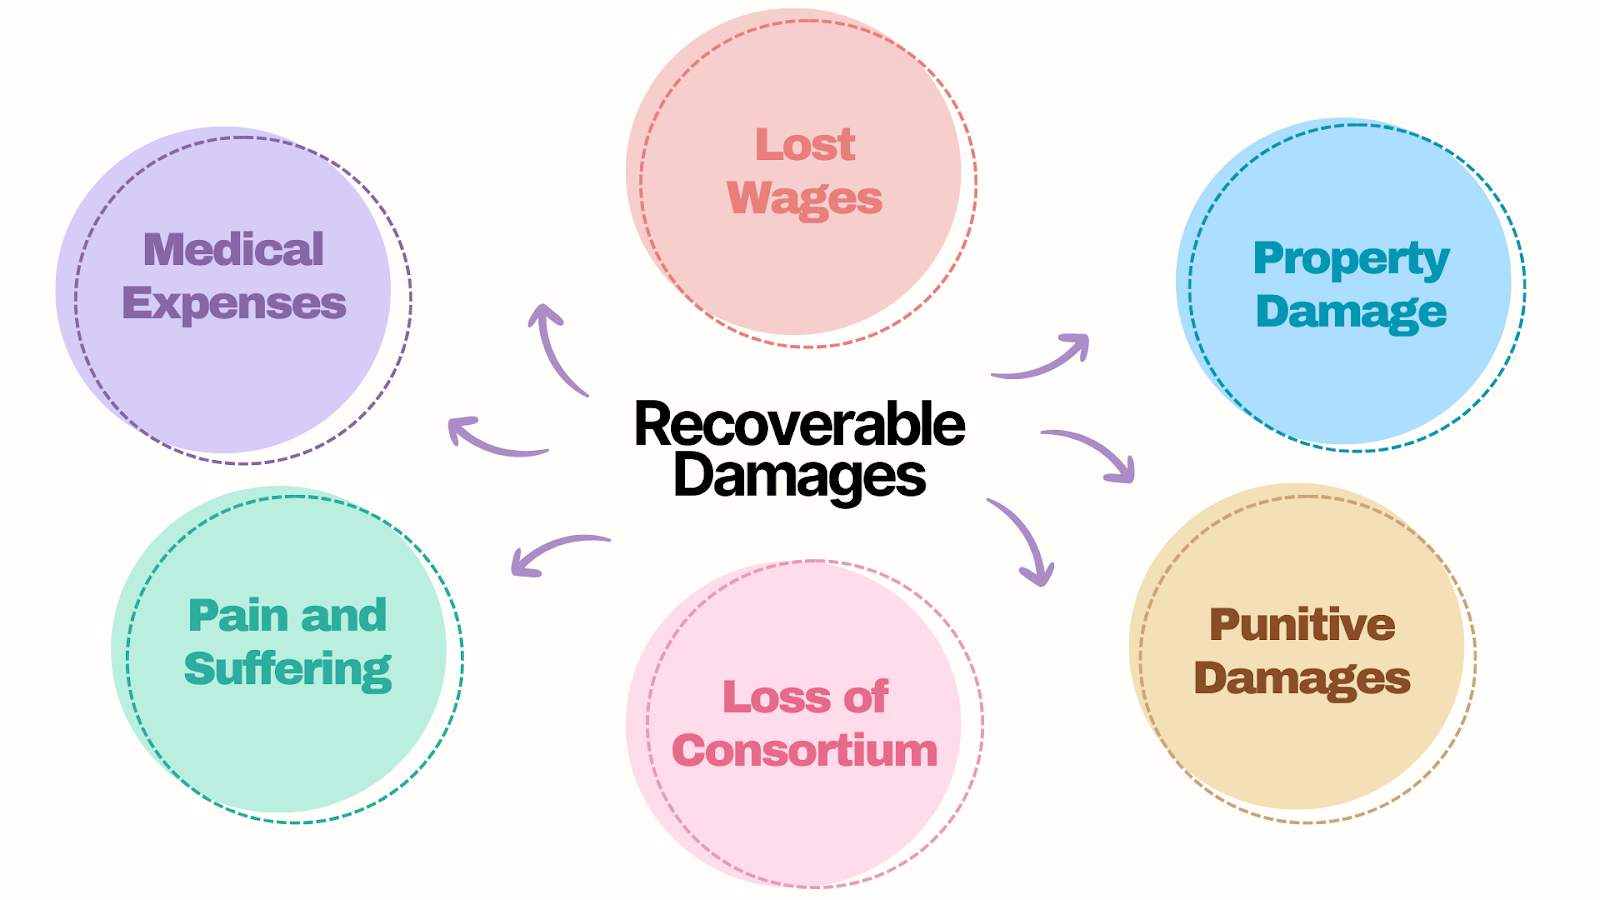 Recoverable Damages